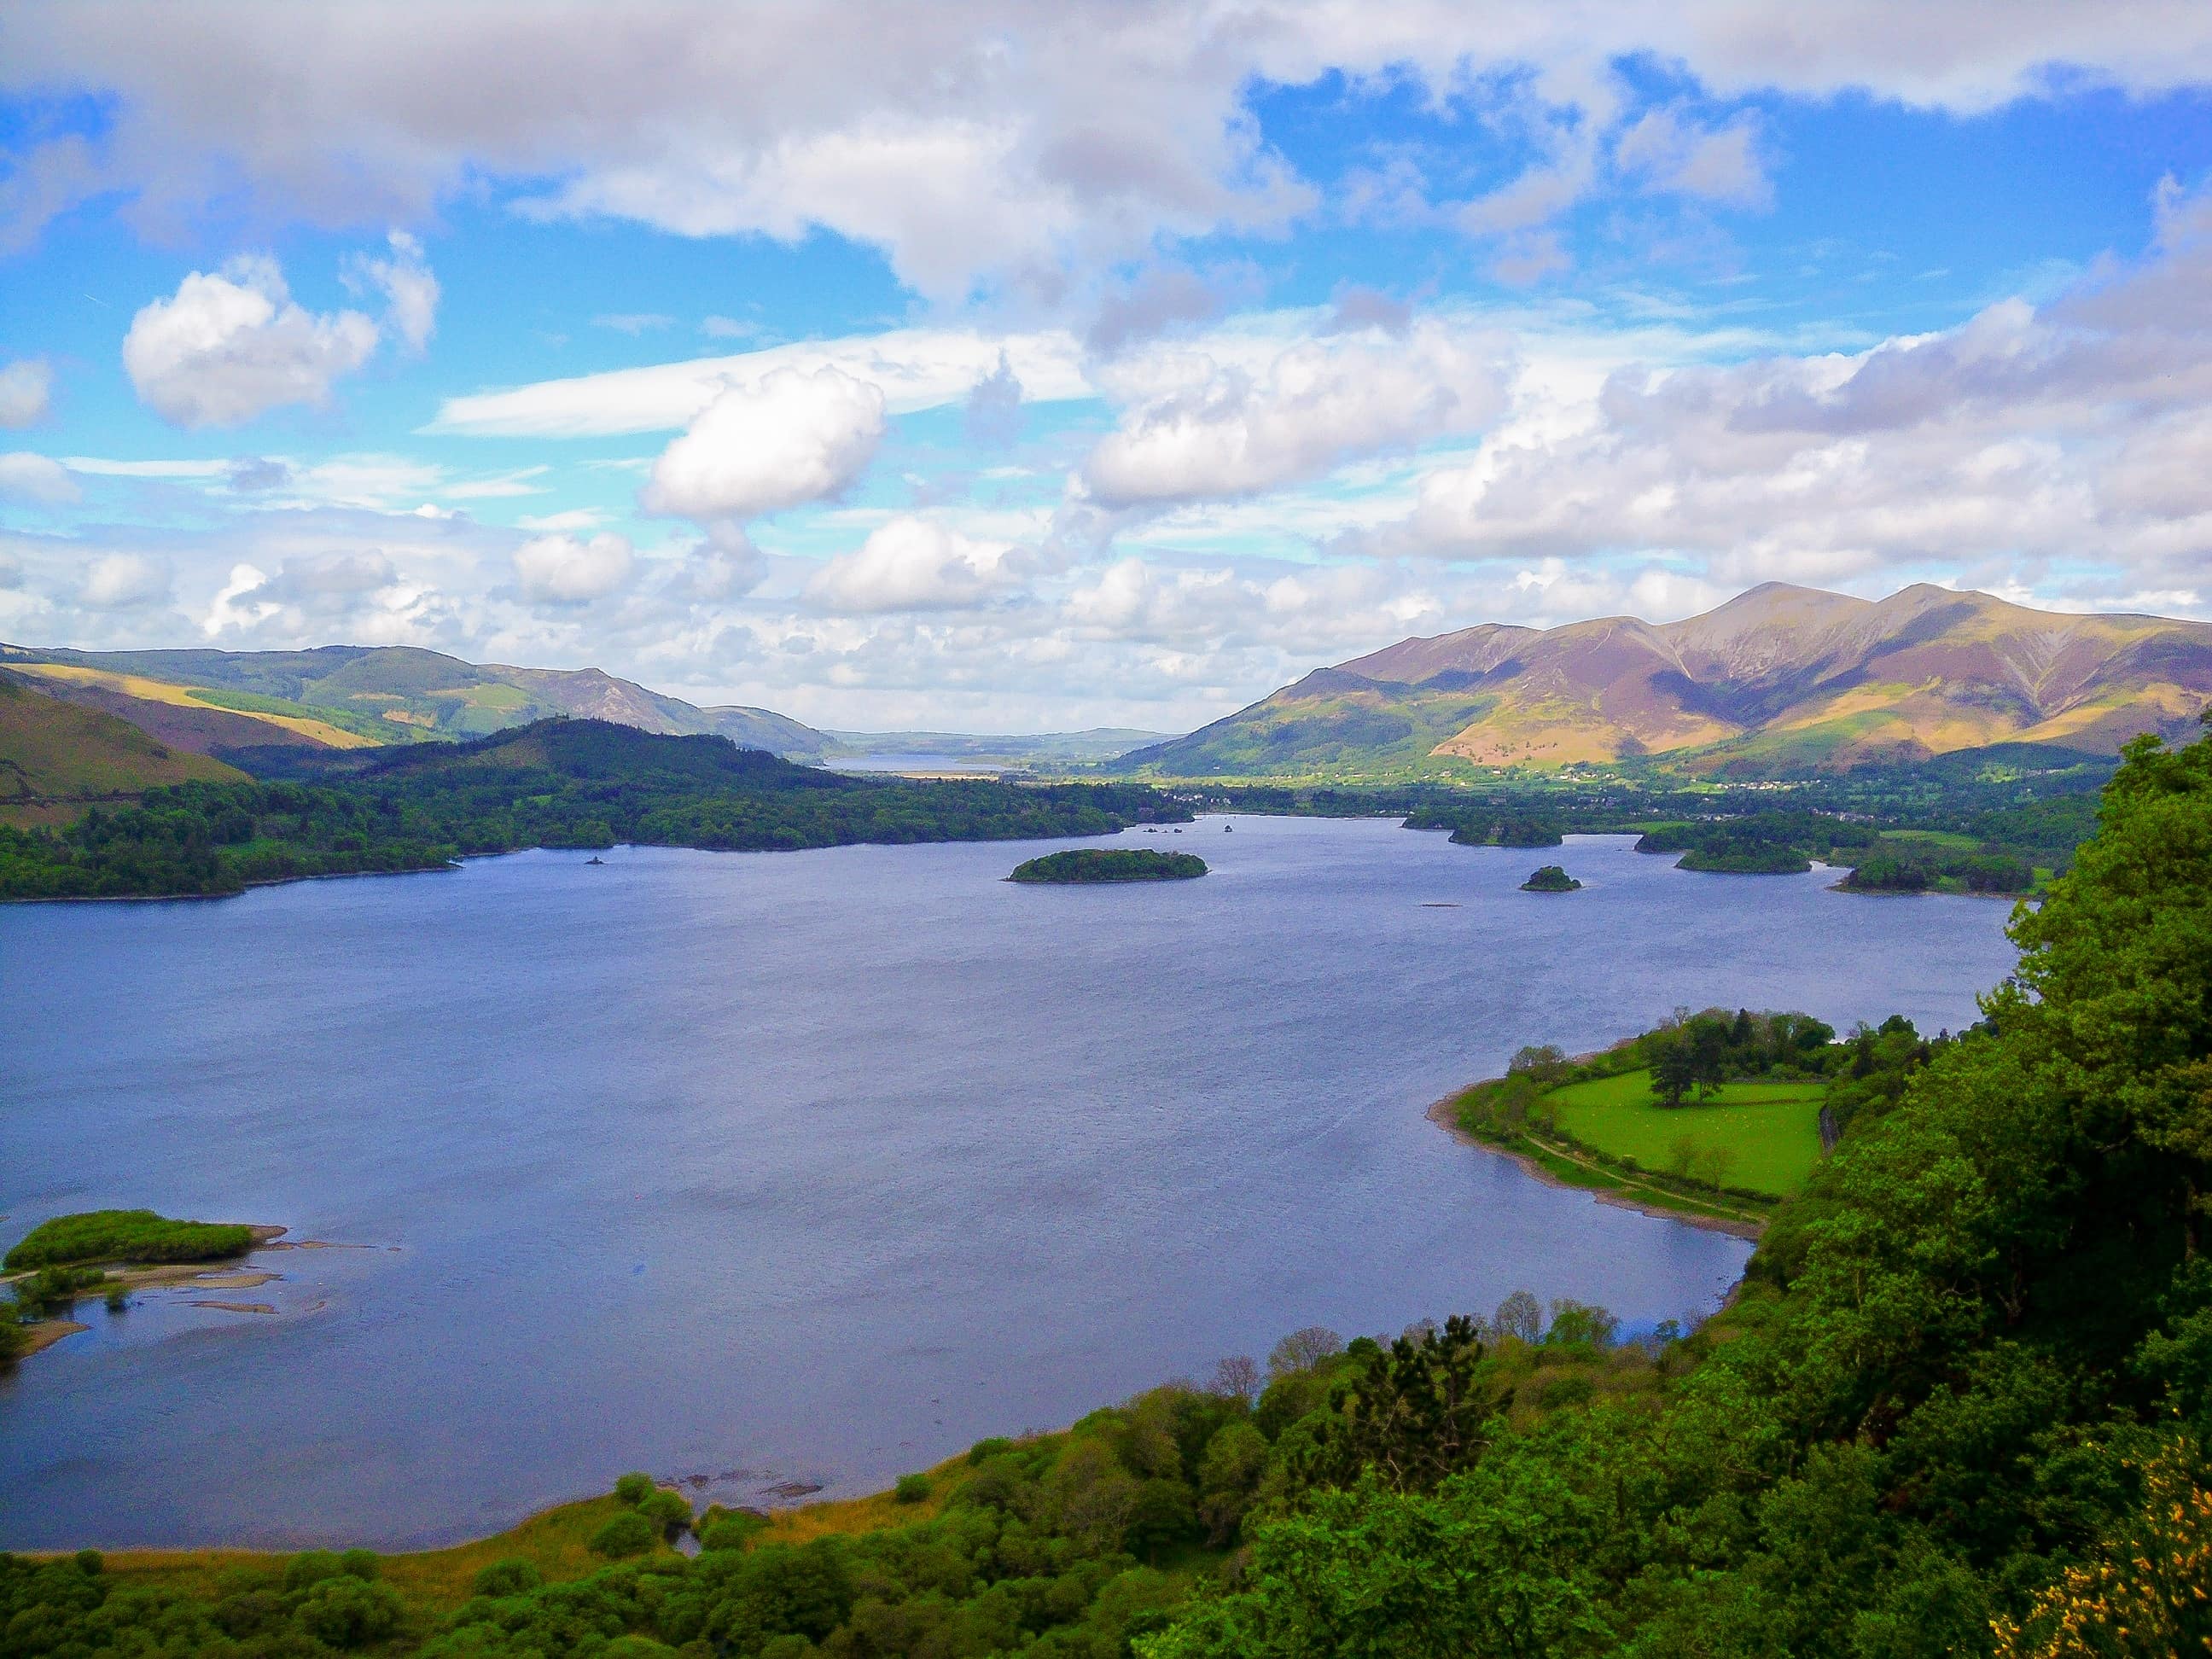 A view of Derwent Water from the mountains around Keswick